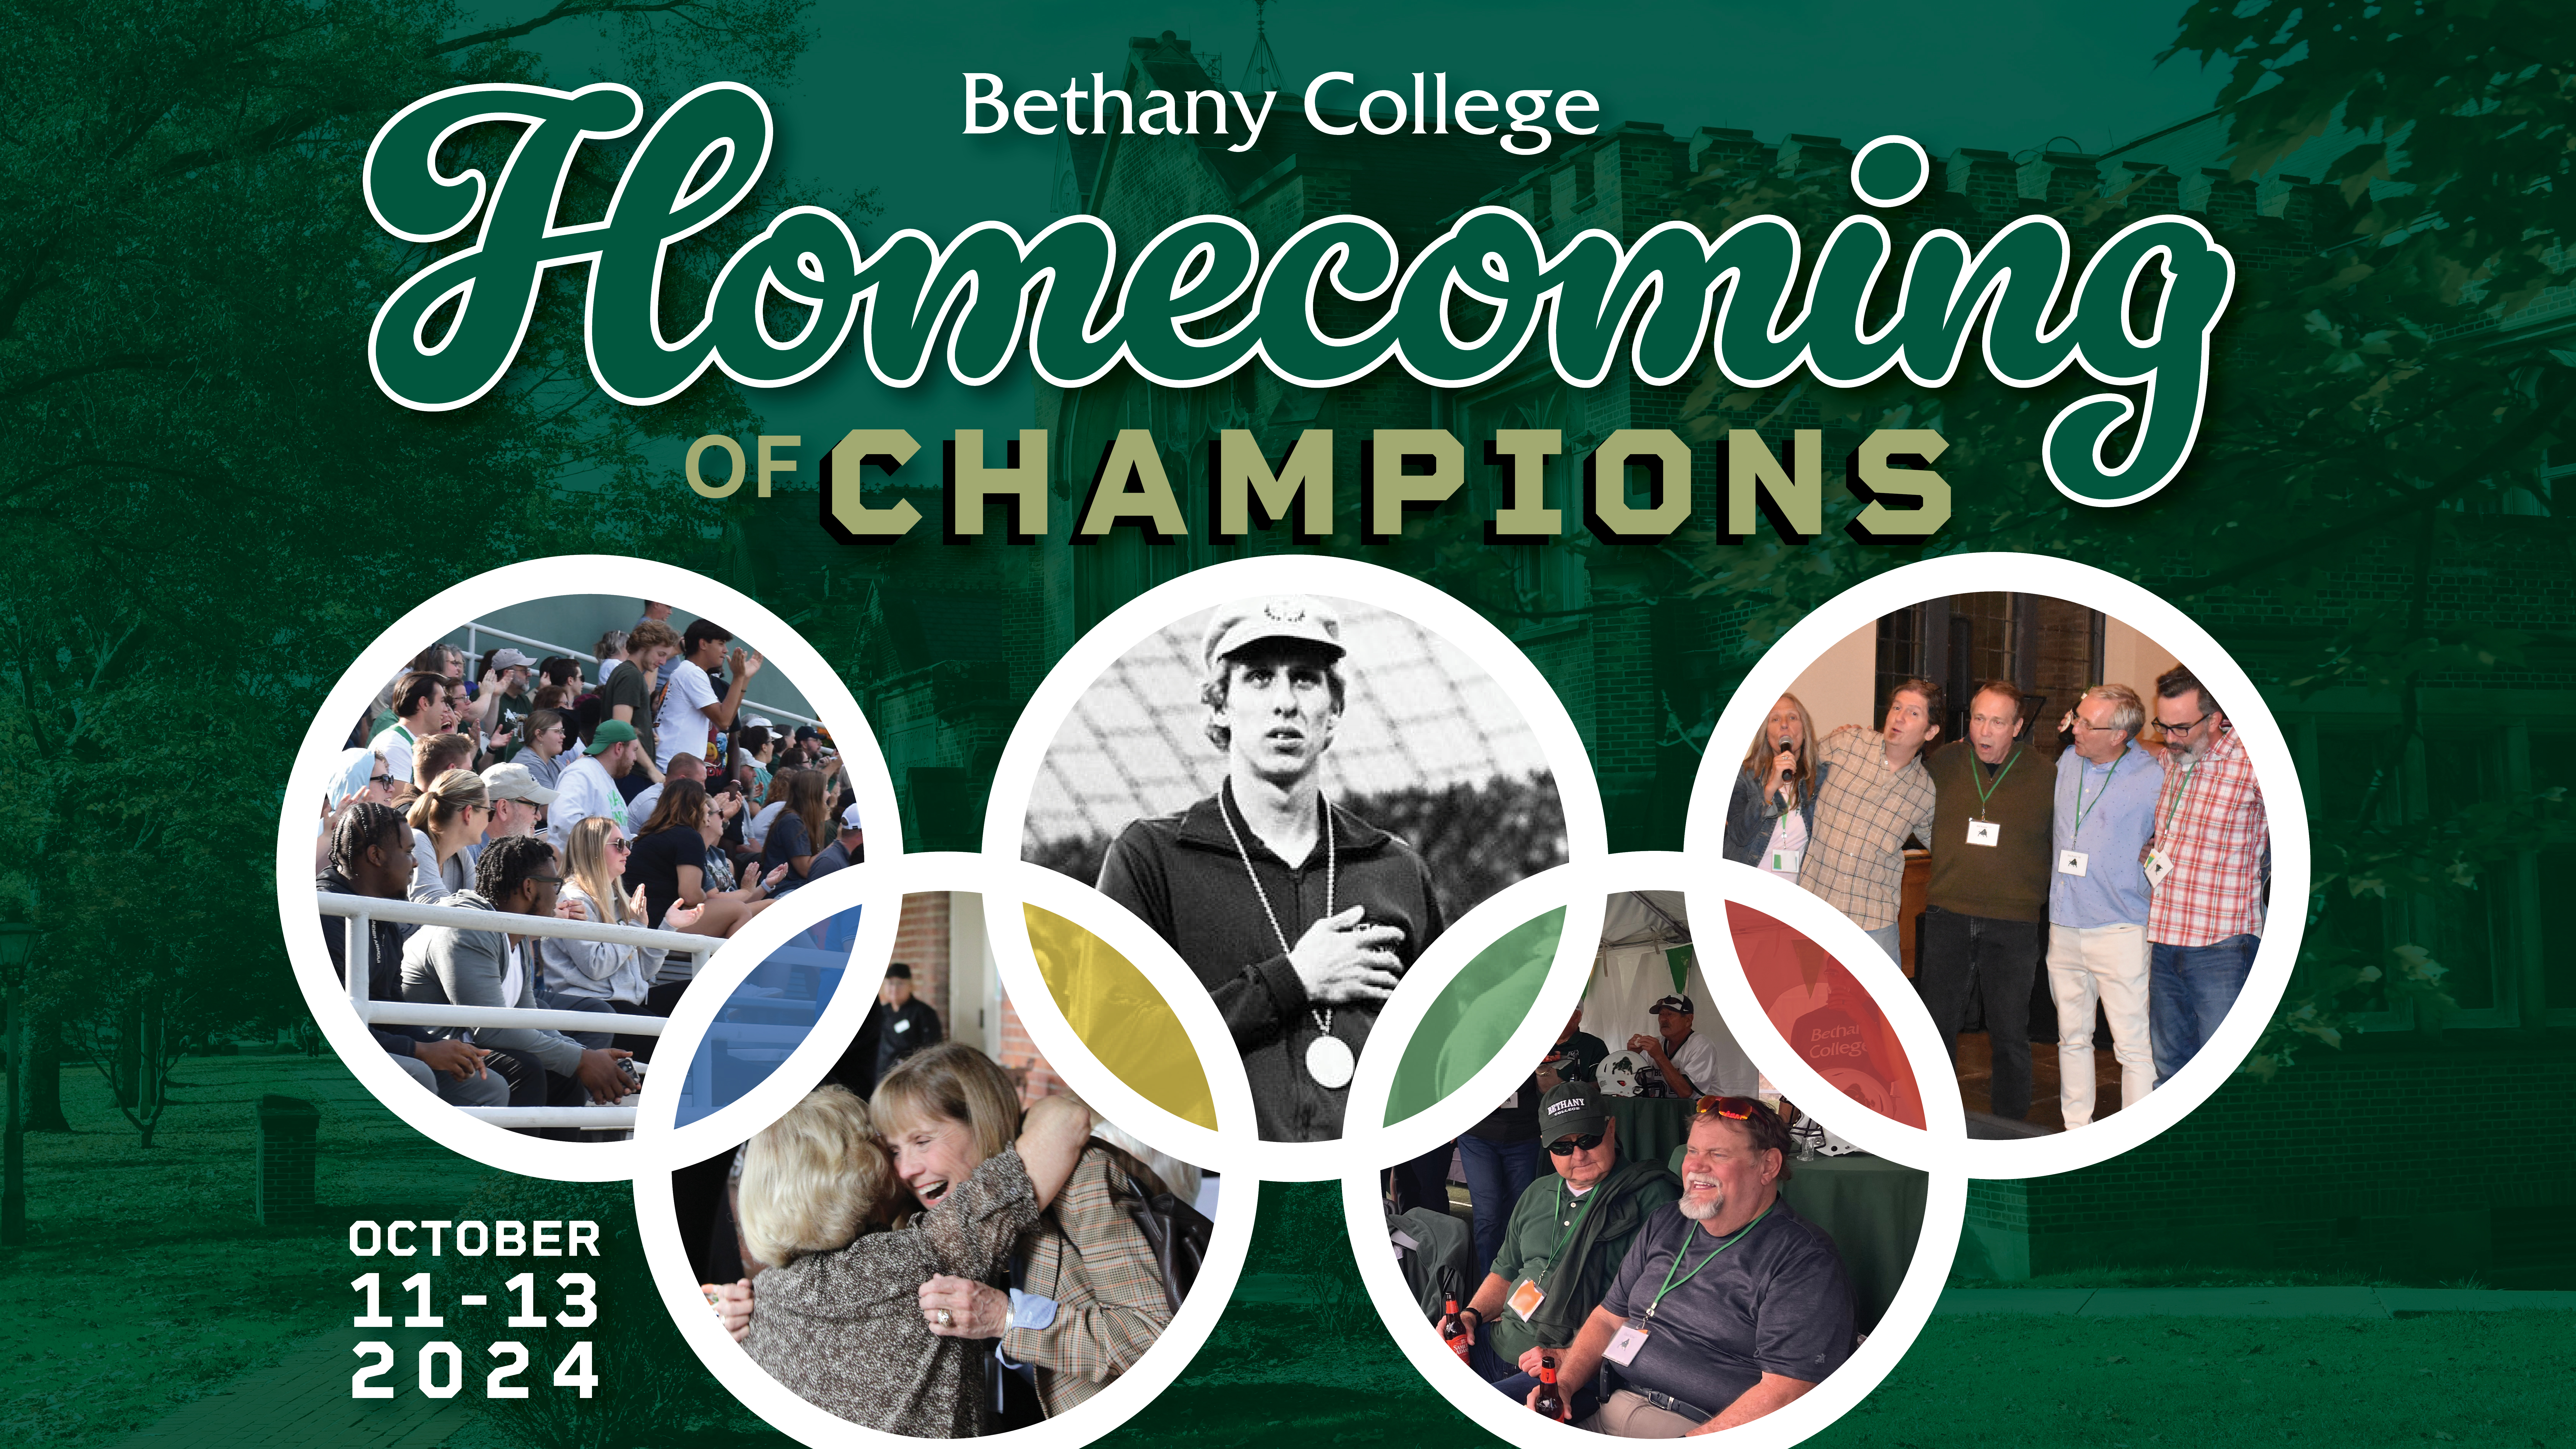 Bethany's Homecoming of Champions will take place on October 11-13, 2024.